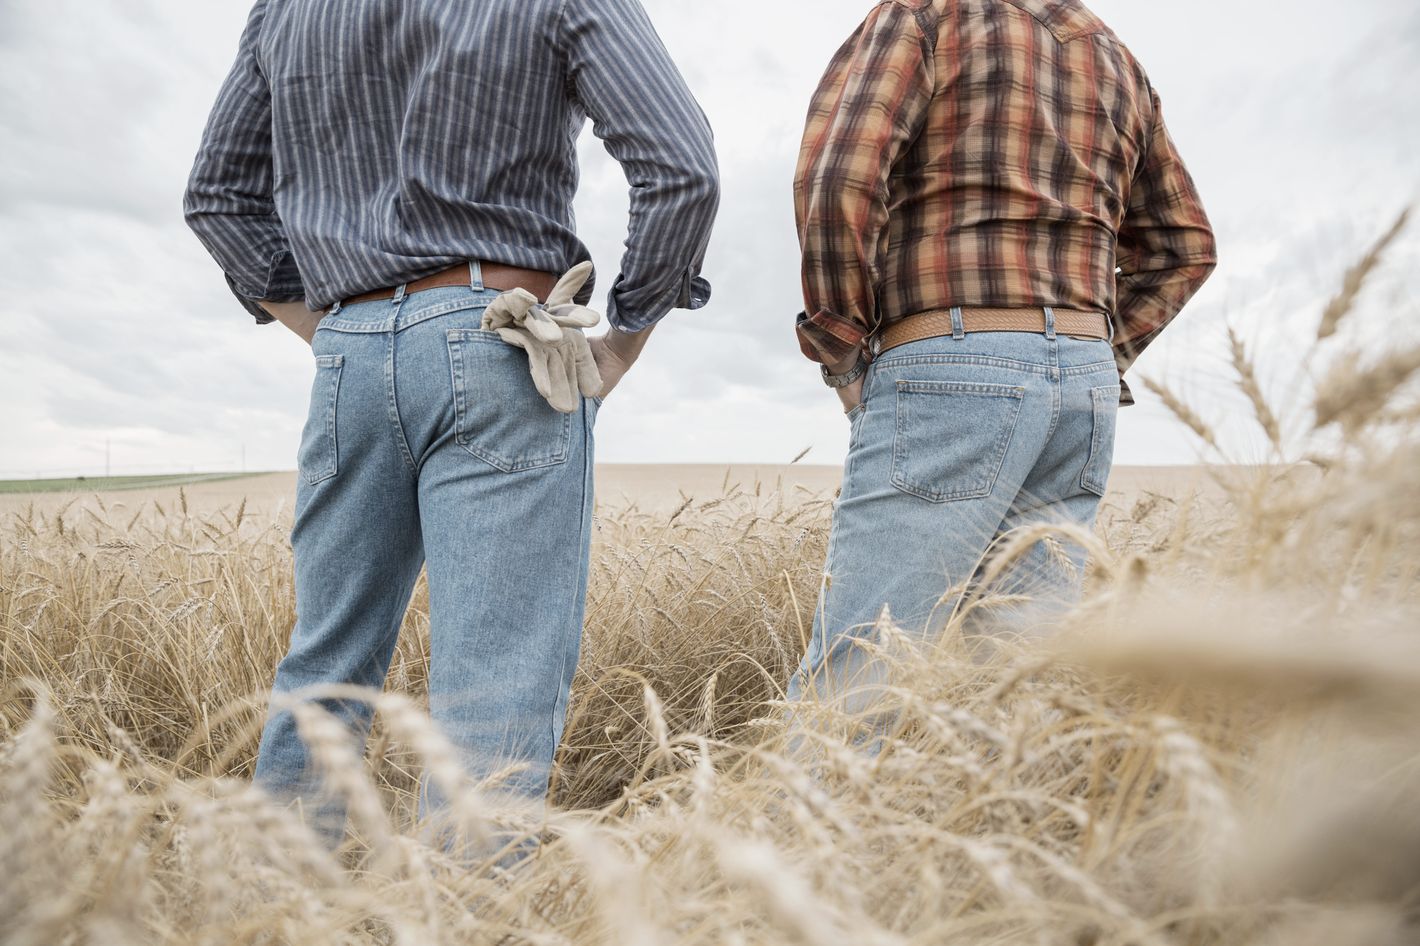 Why Straight Rural Men Have Gay Bud-Sex With Each Other -- Science of Us image